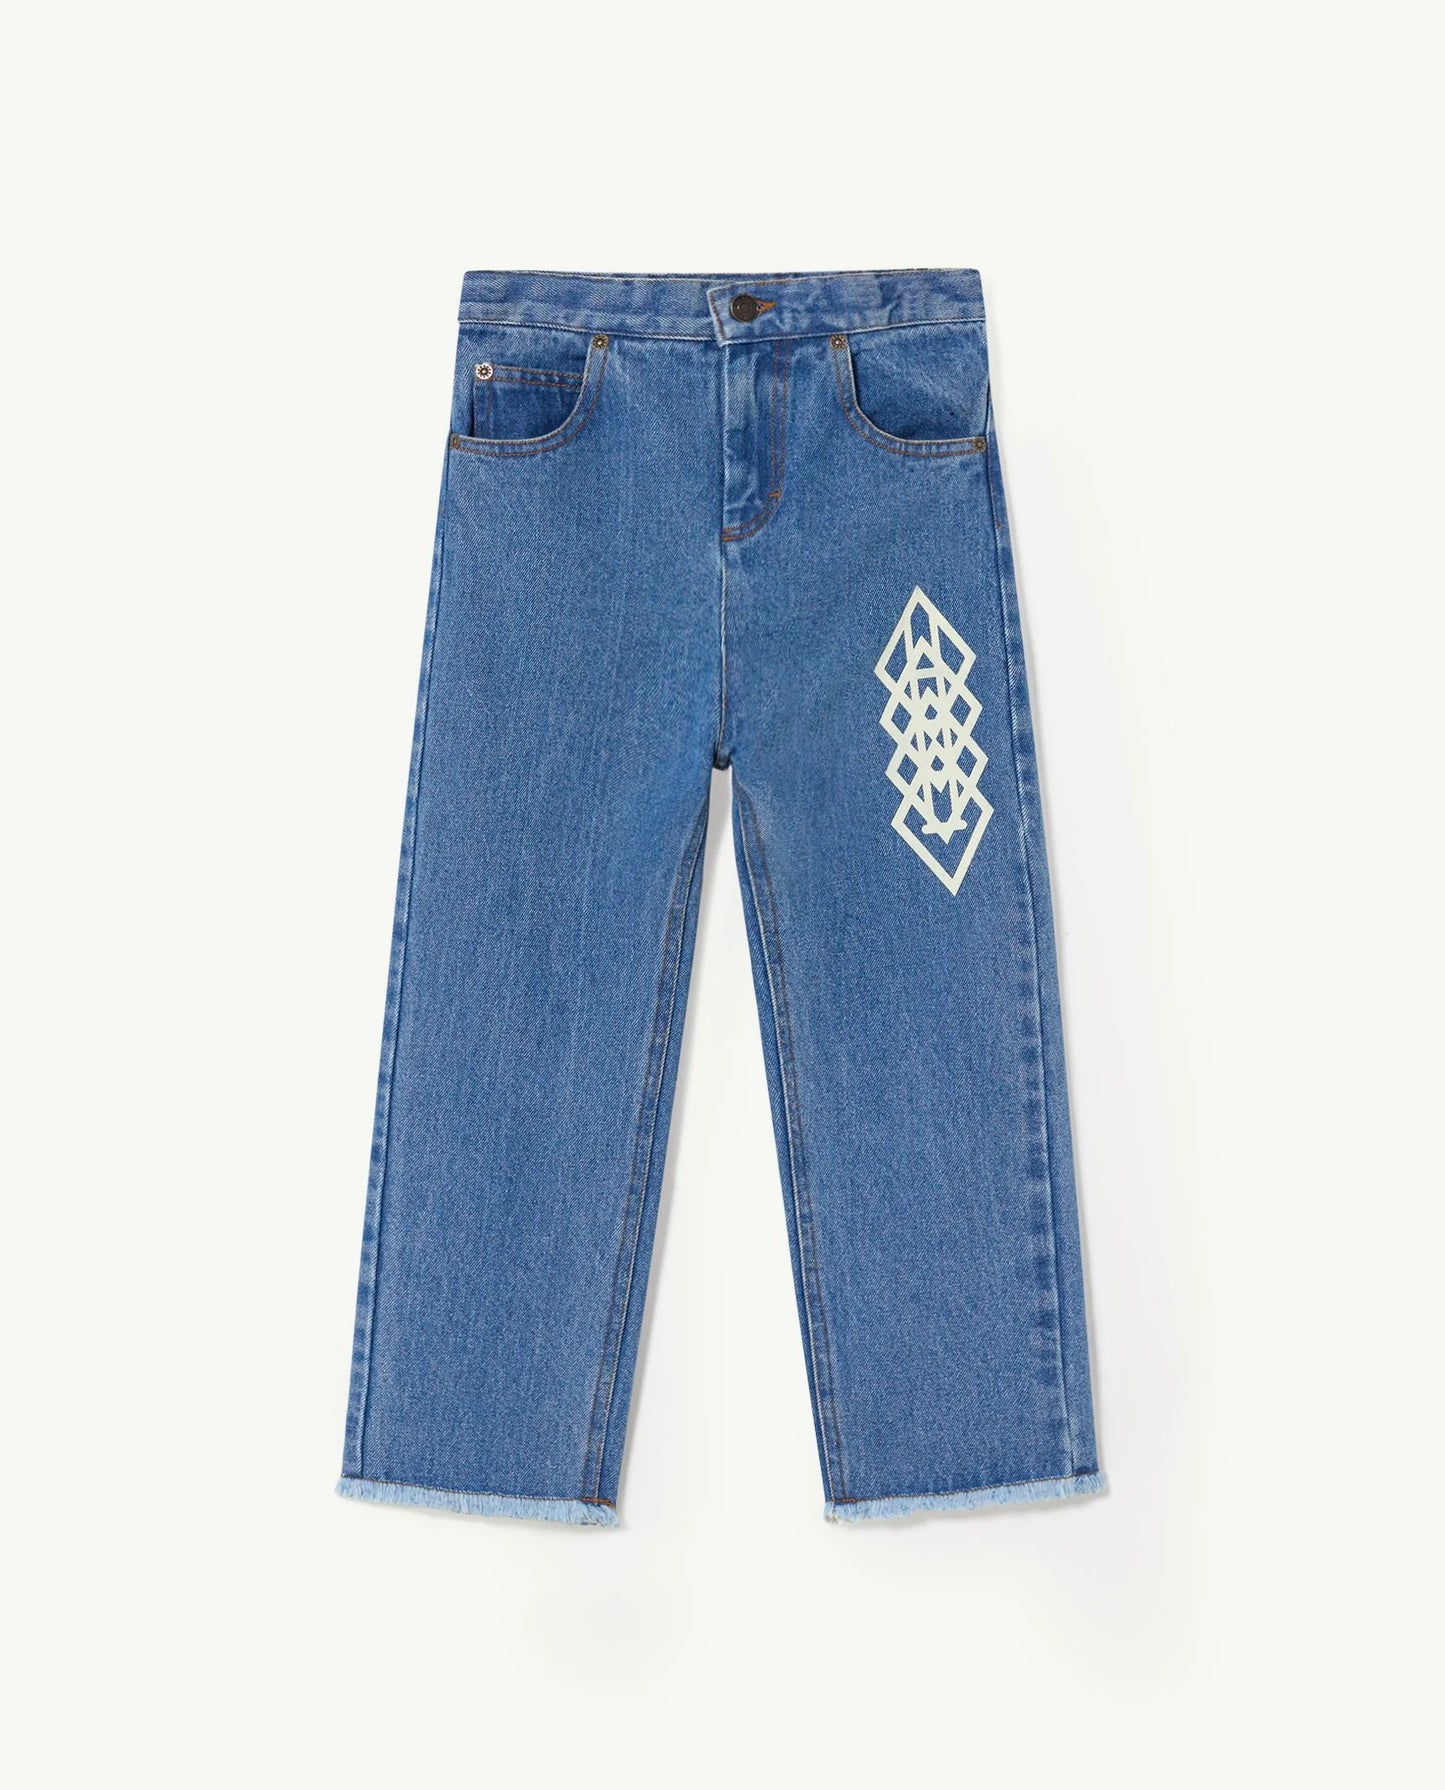 SOFT BLUE ANT JEANS